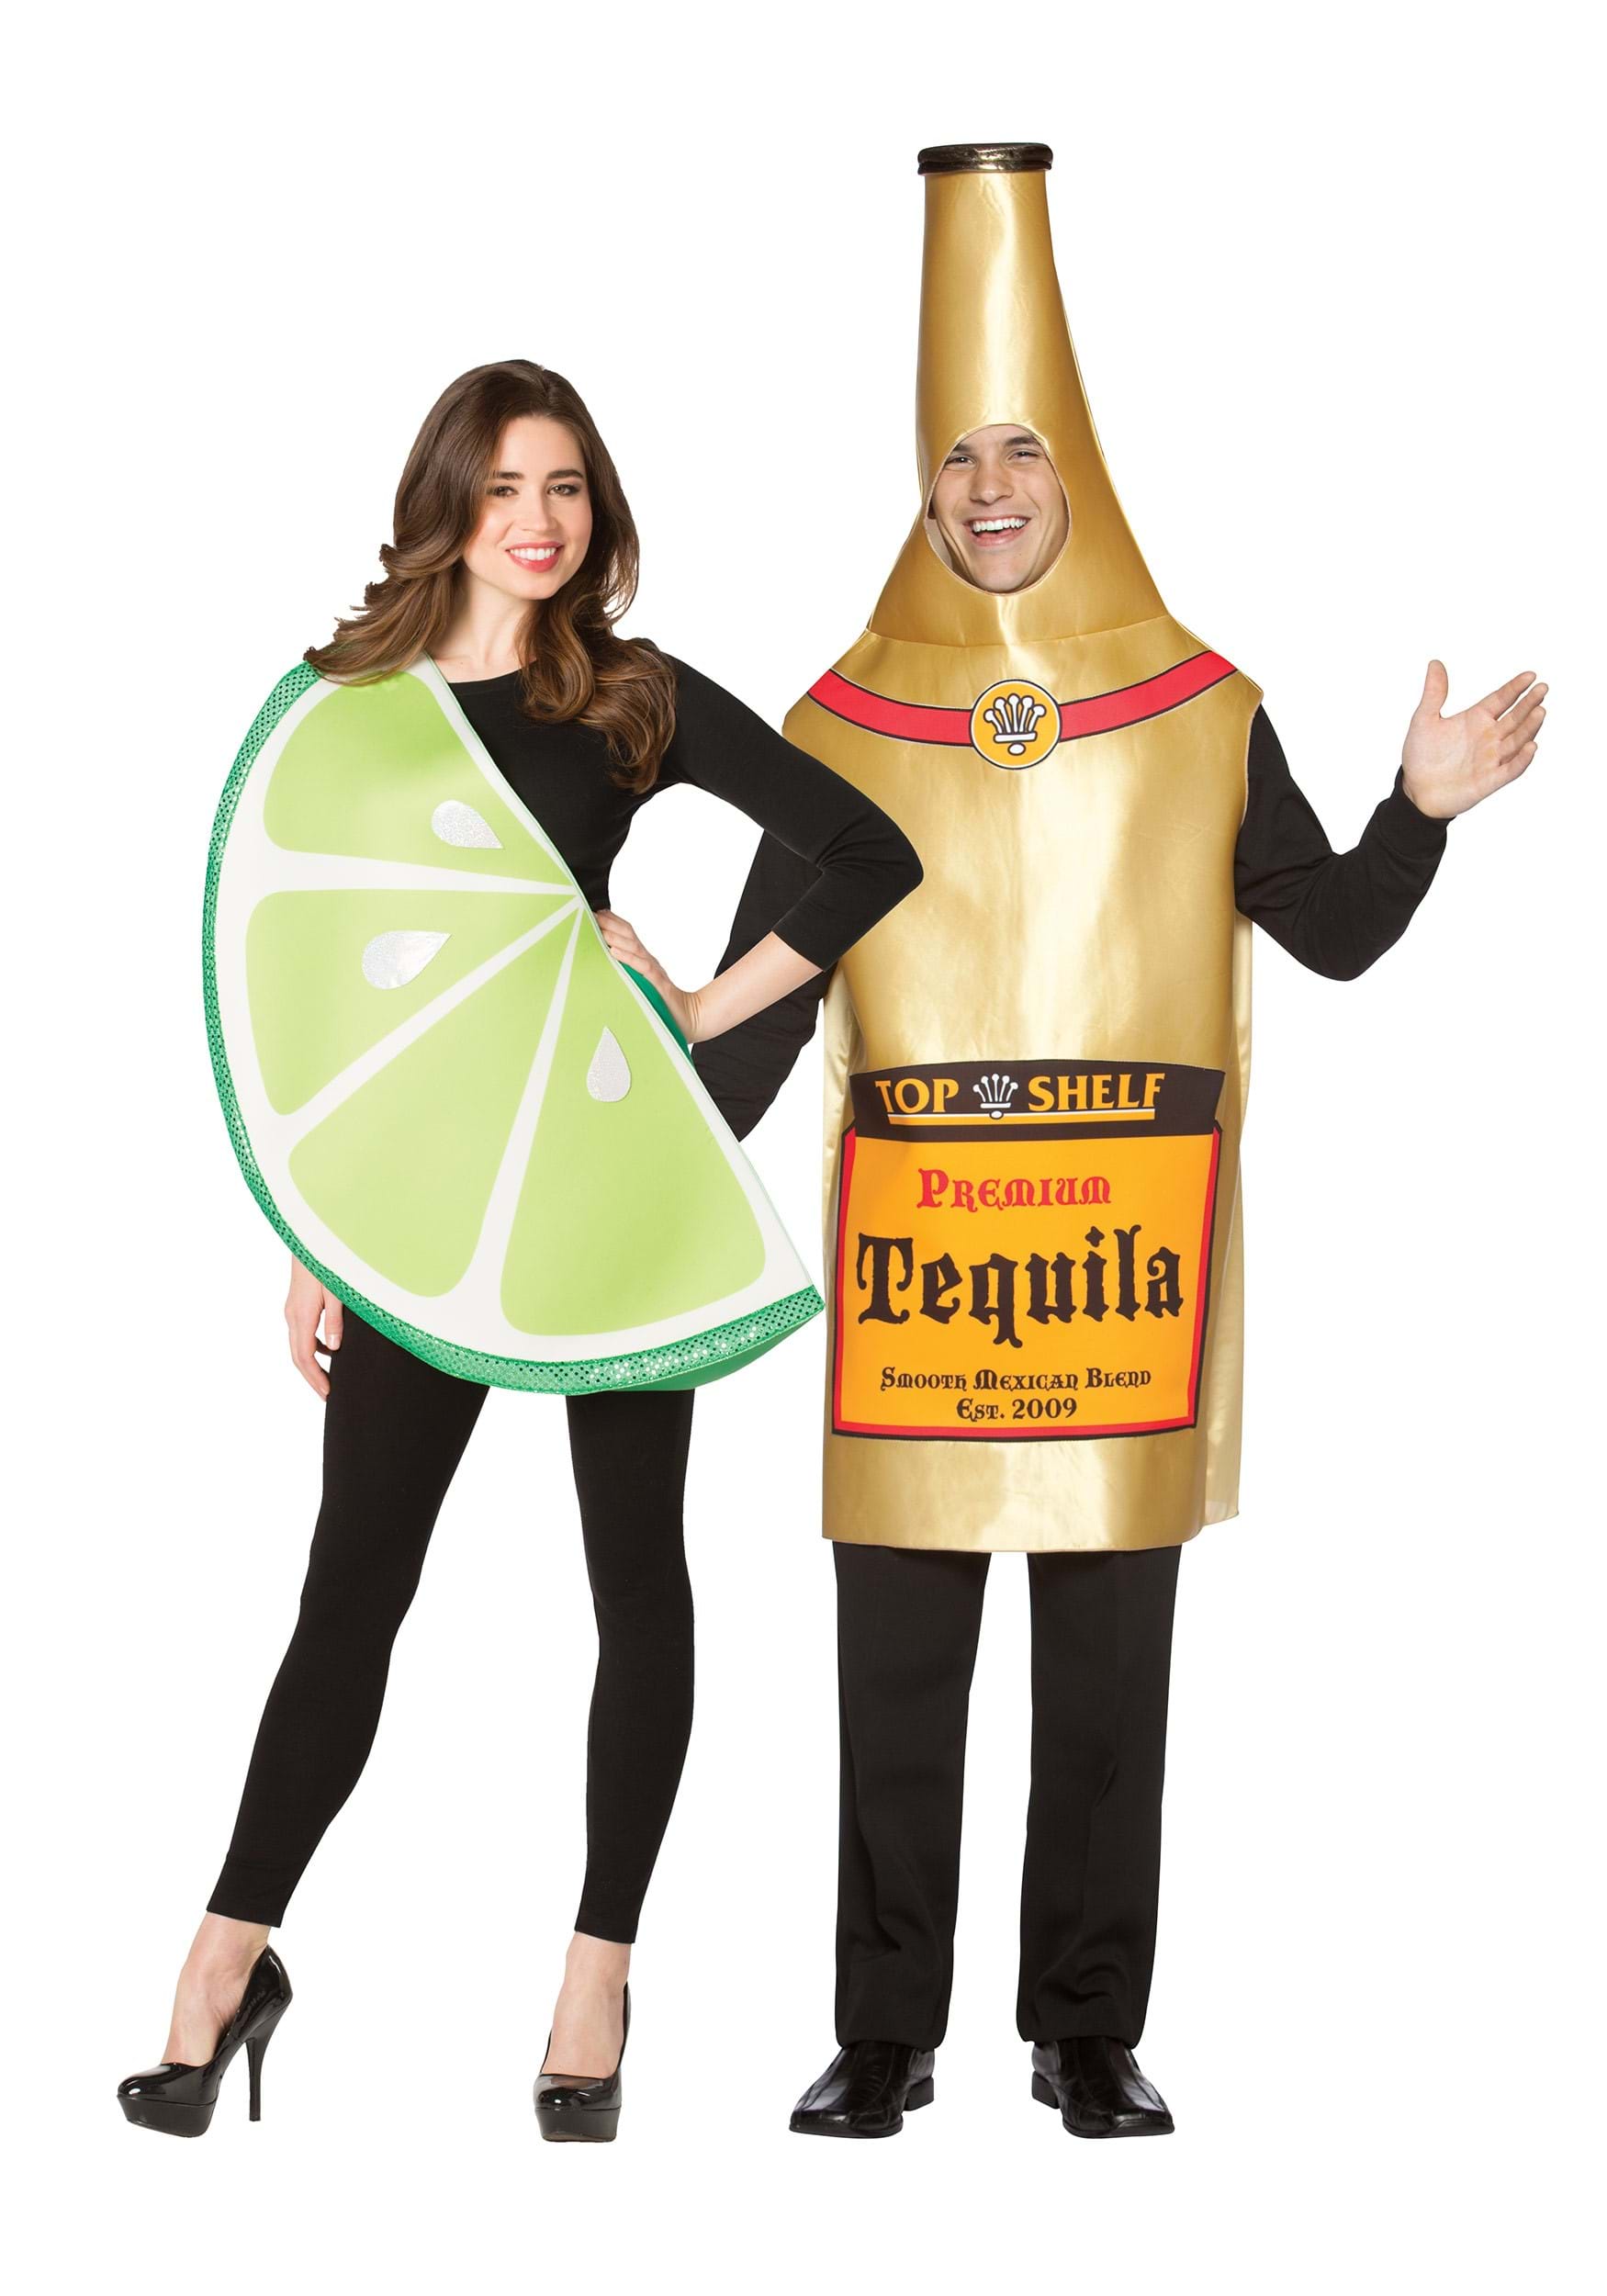 Tequila Bottle and Lime Slice Couple’s Costume